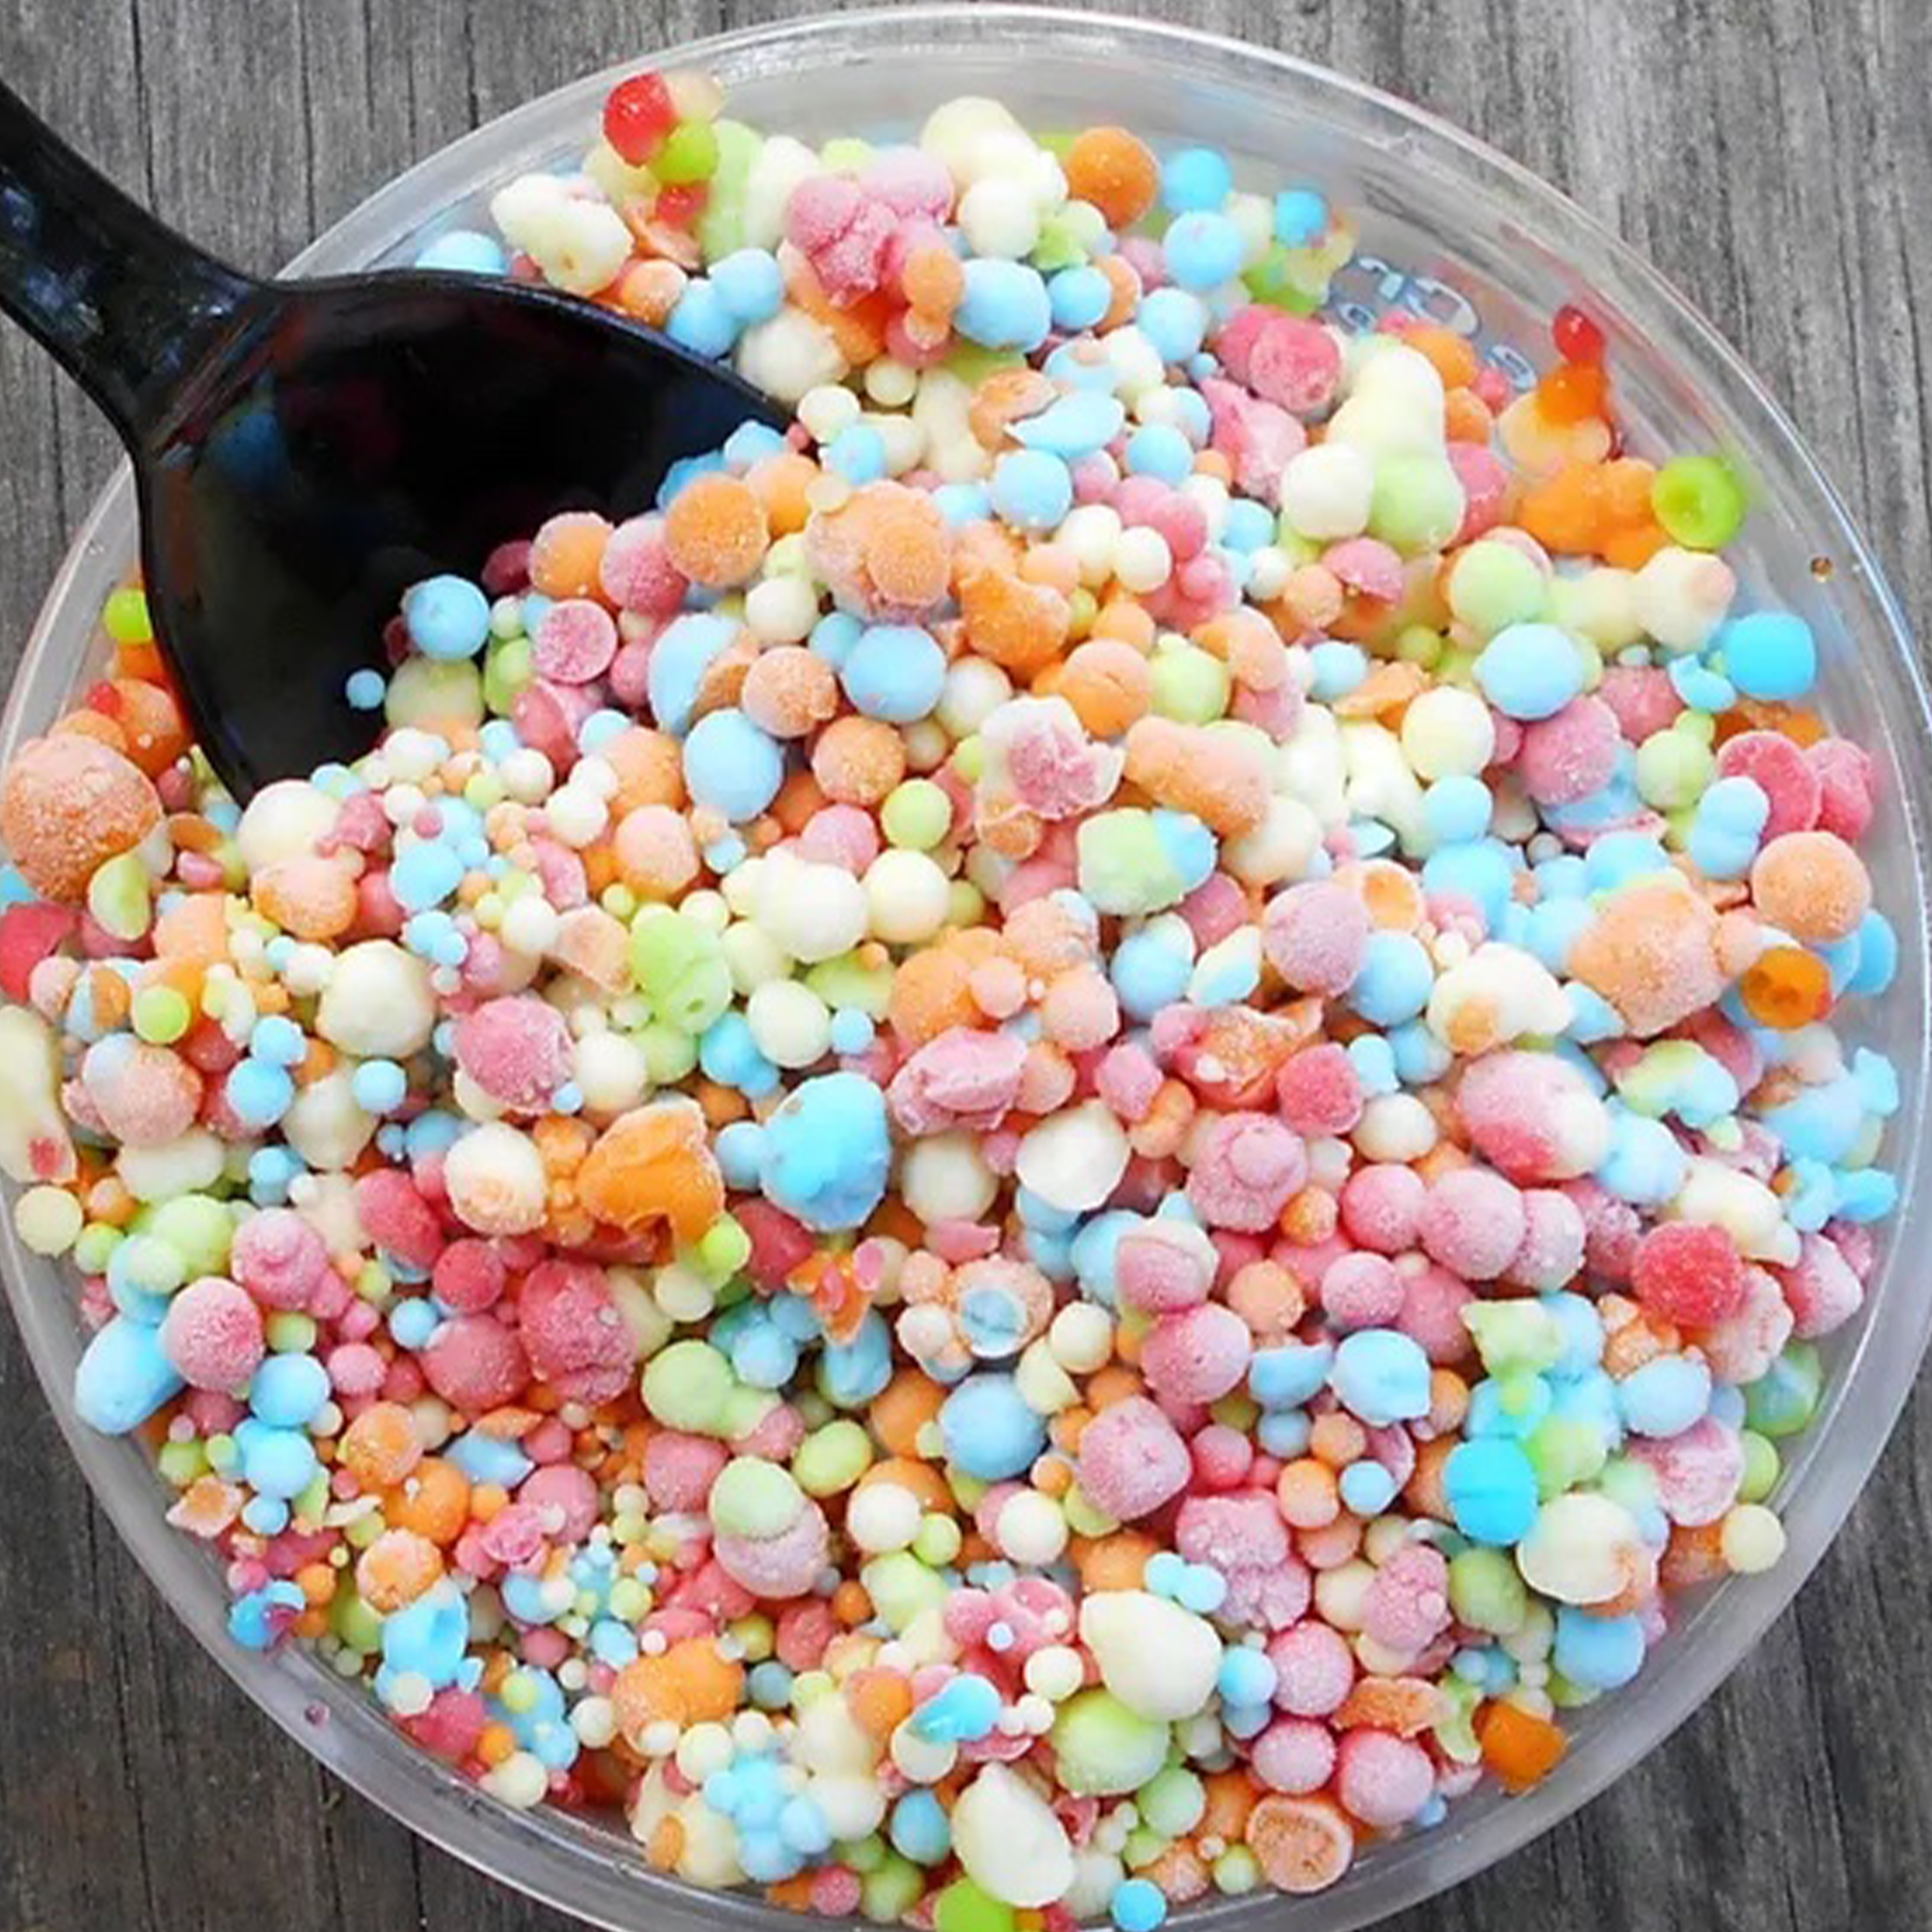 Beyond Meat Ruins Dippin Dots and Meat Simultaneously